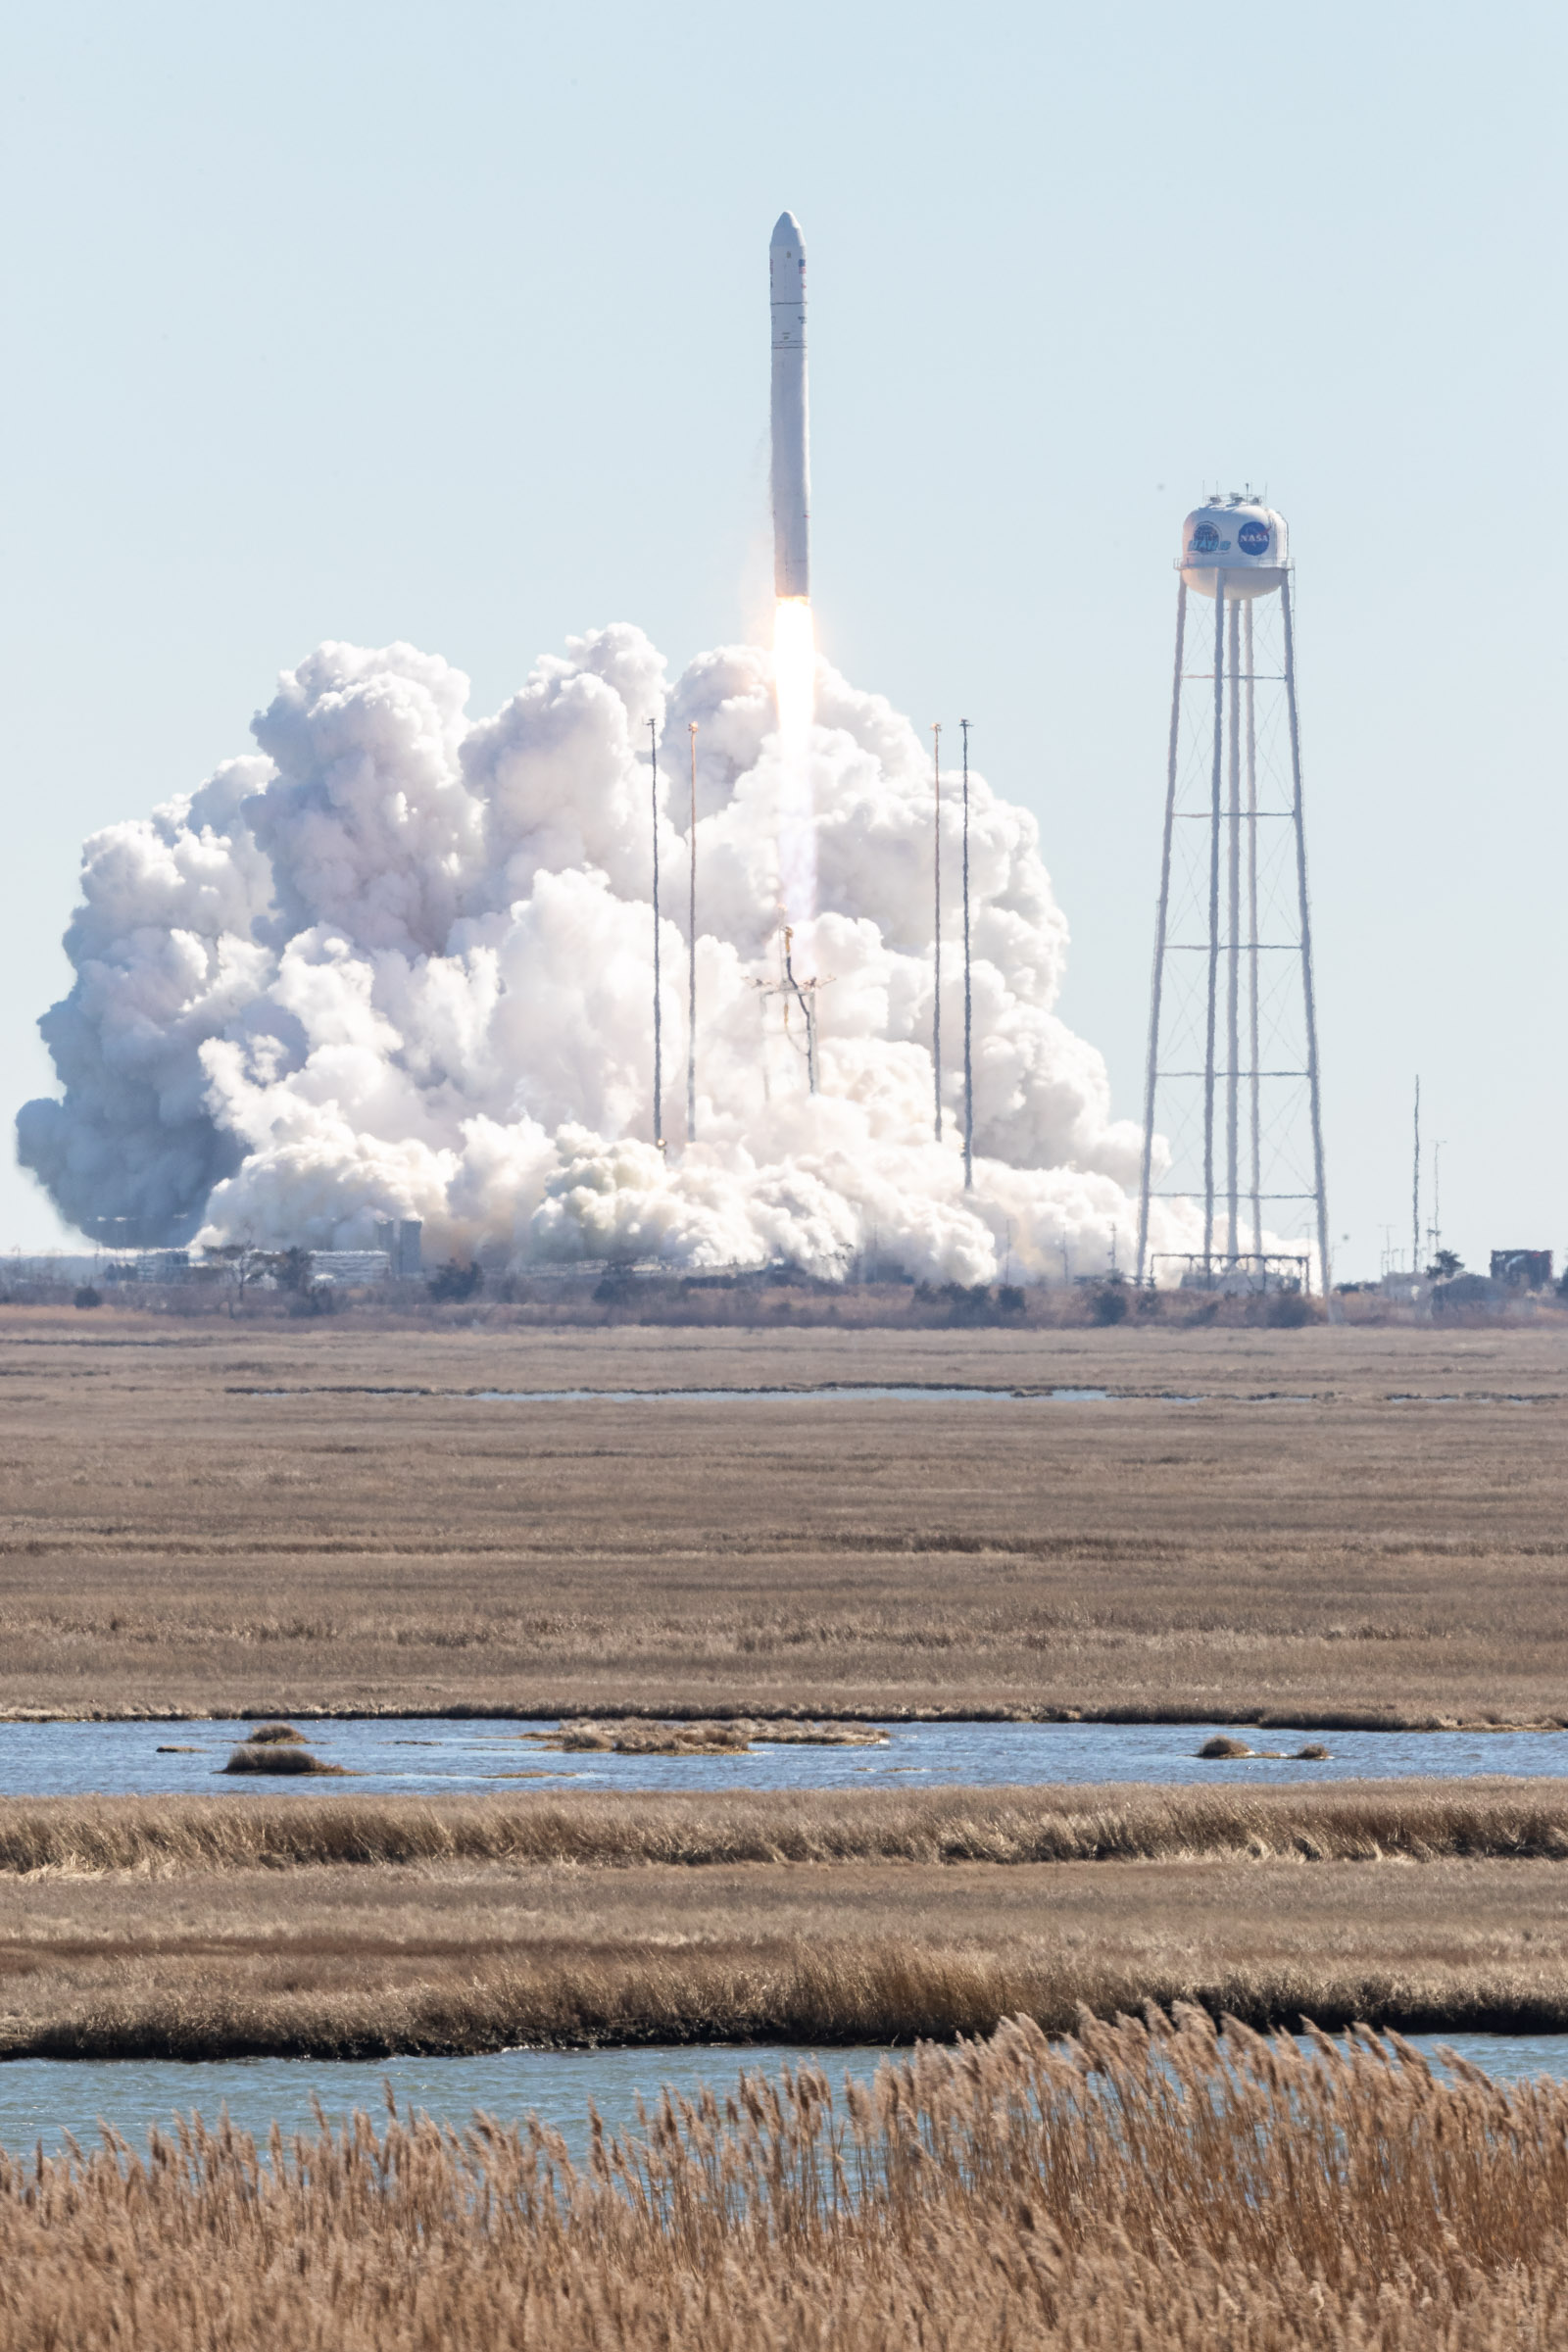 Northrop Grumman Antares Launches Cygnus Cargo Craft Carrying 4 Tons NASA Science to ISS